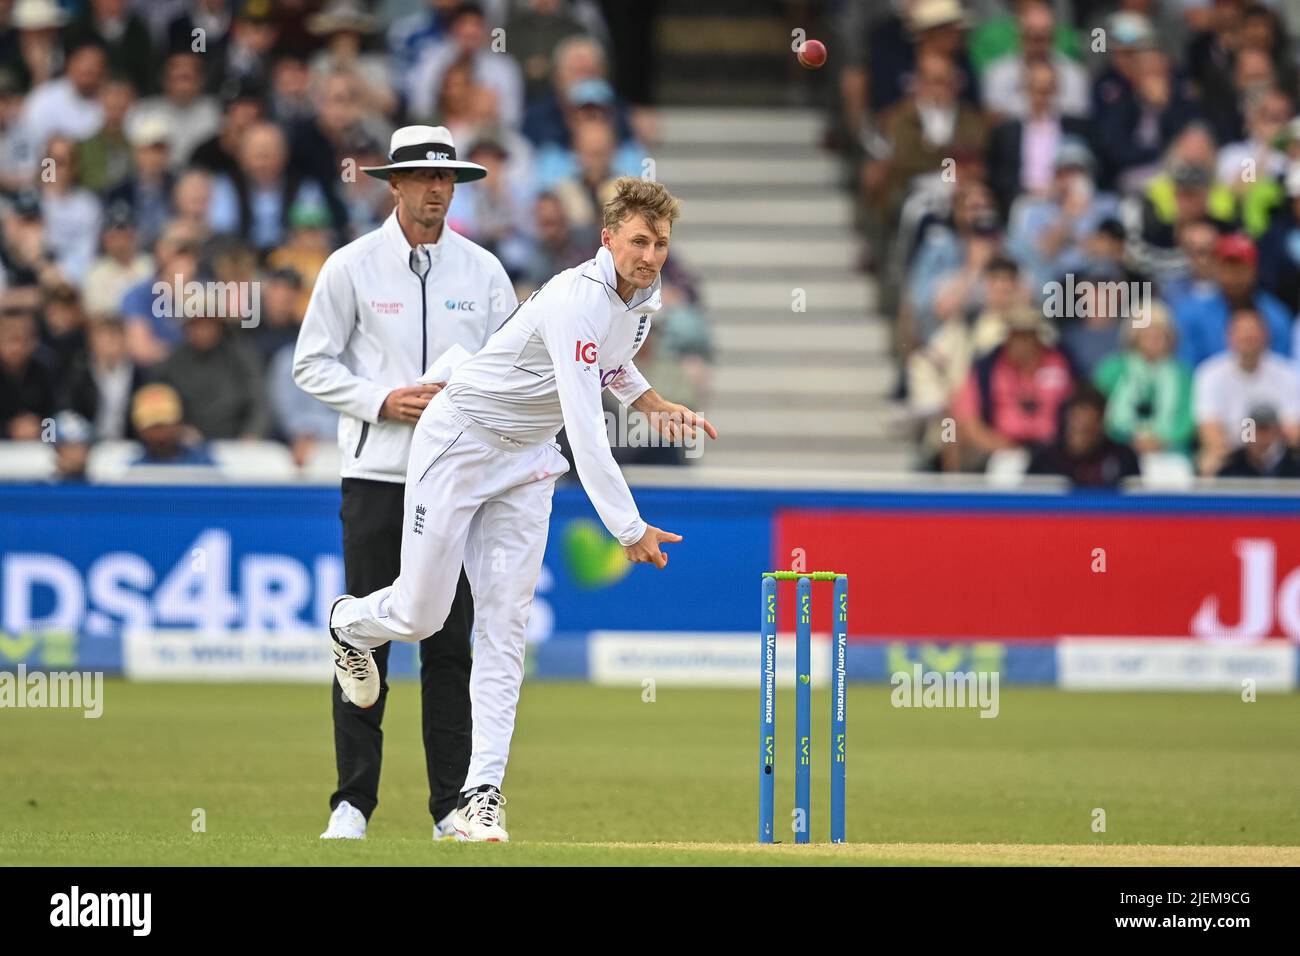 Joe Root of England delivers the ball during day 2 of the 2nd Test between the New Zealand Blackcaps and England at Trent Bridge Cricket Ground, Nottingham, England on Saturday 11 June 2022. Stock Photo